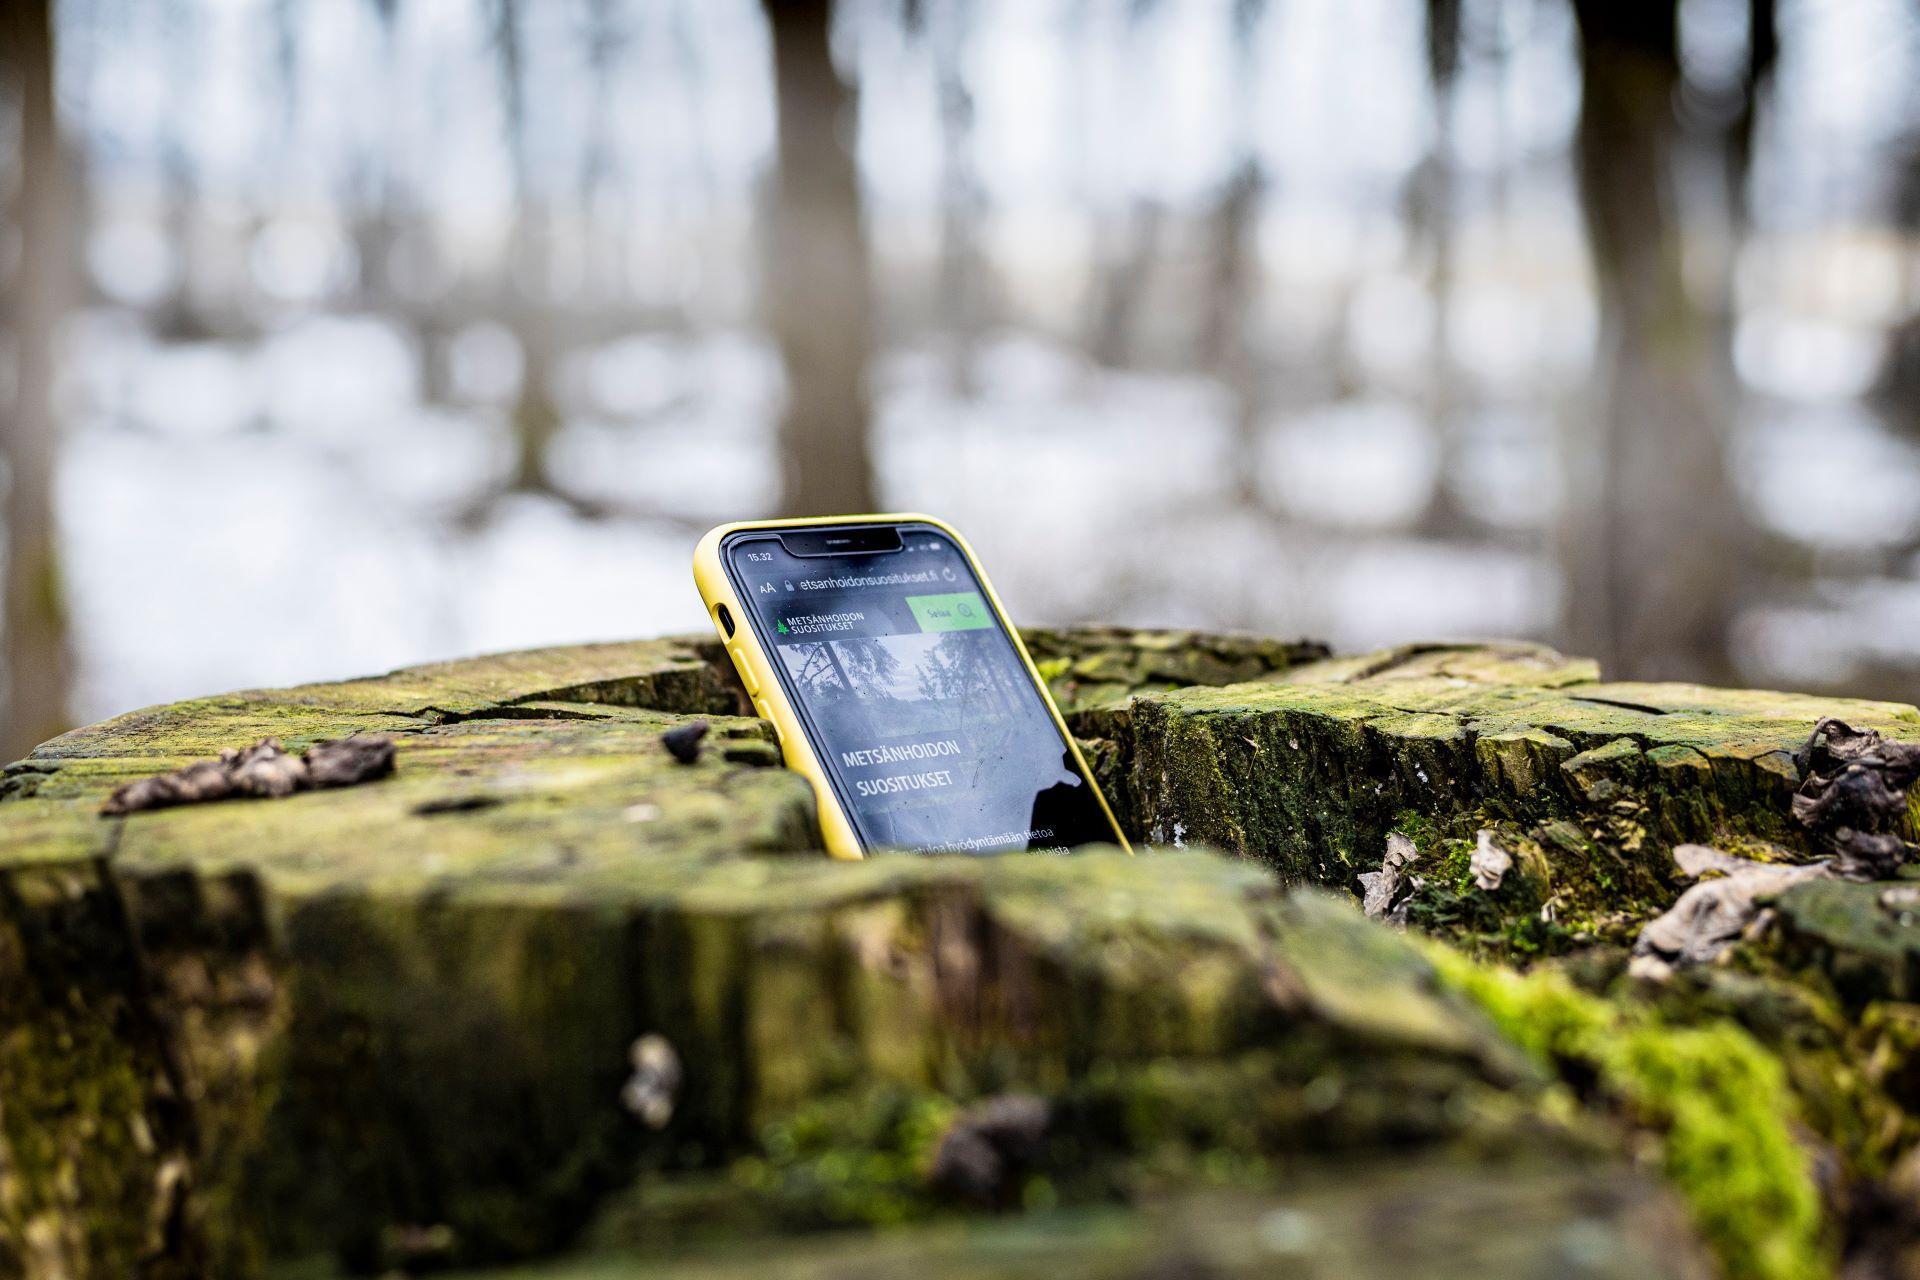 Mobile in a tree trunk